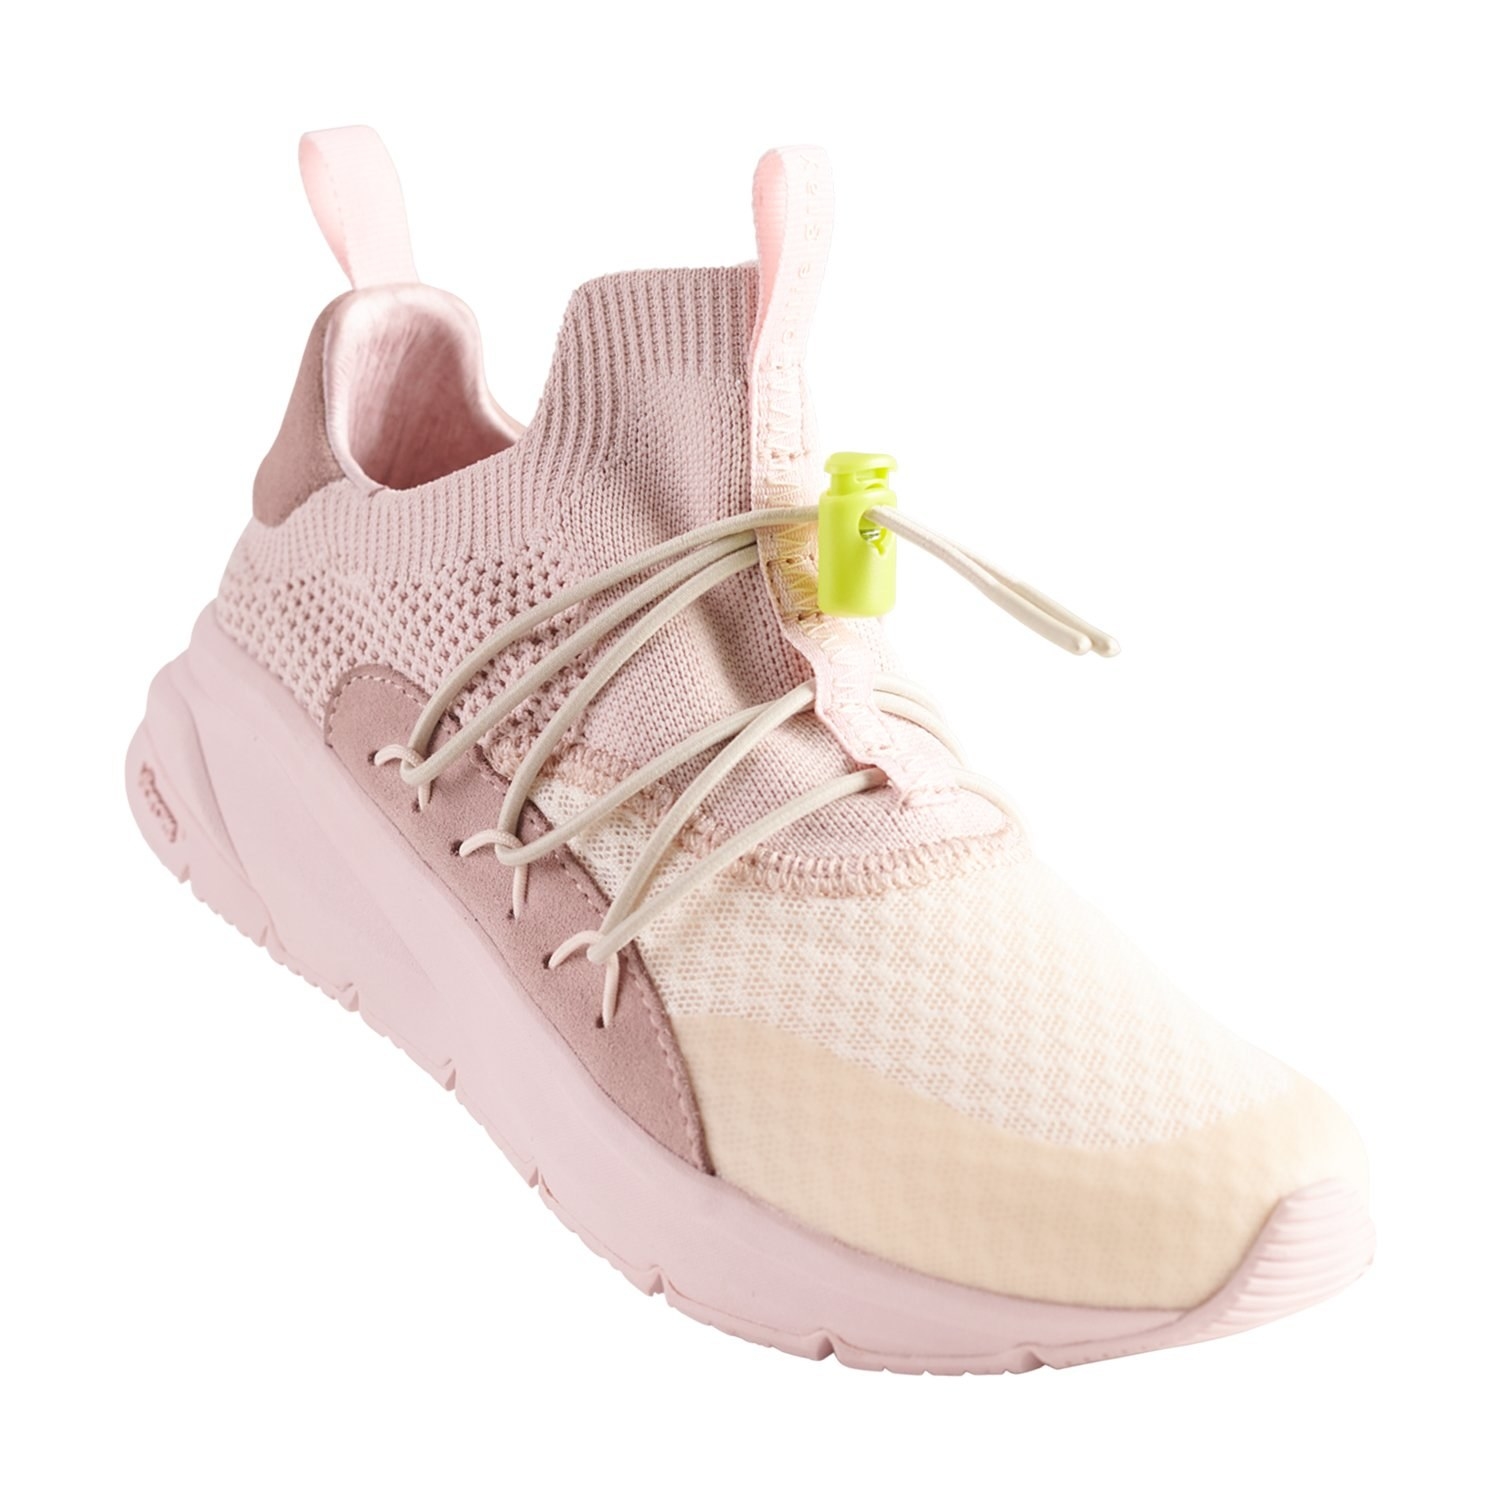 rose pink sneakers with a pull tie lace up